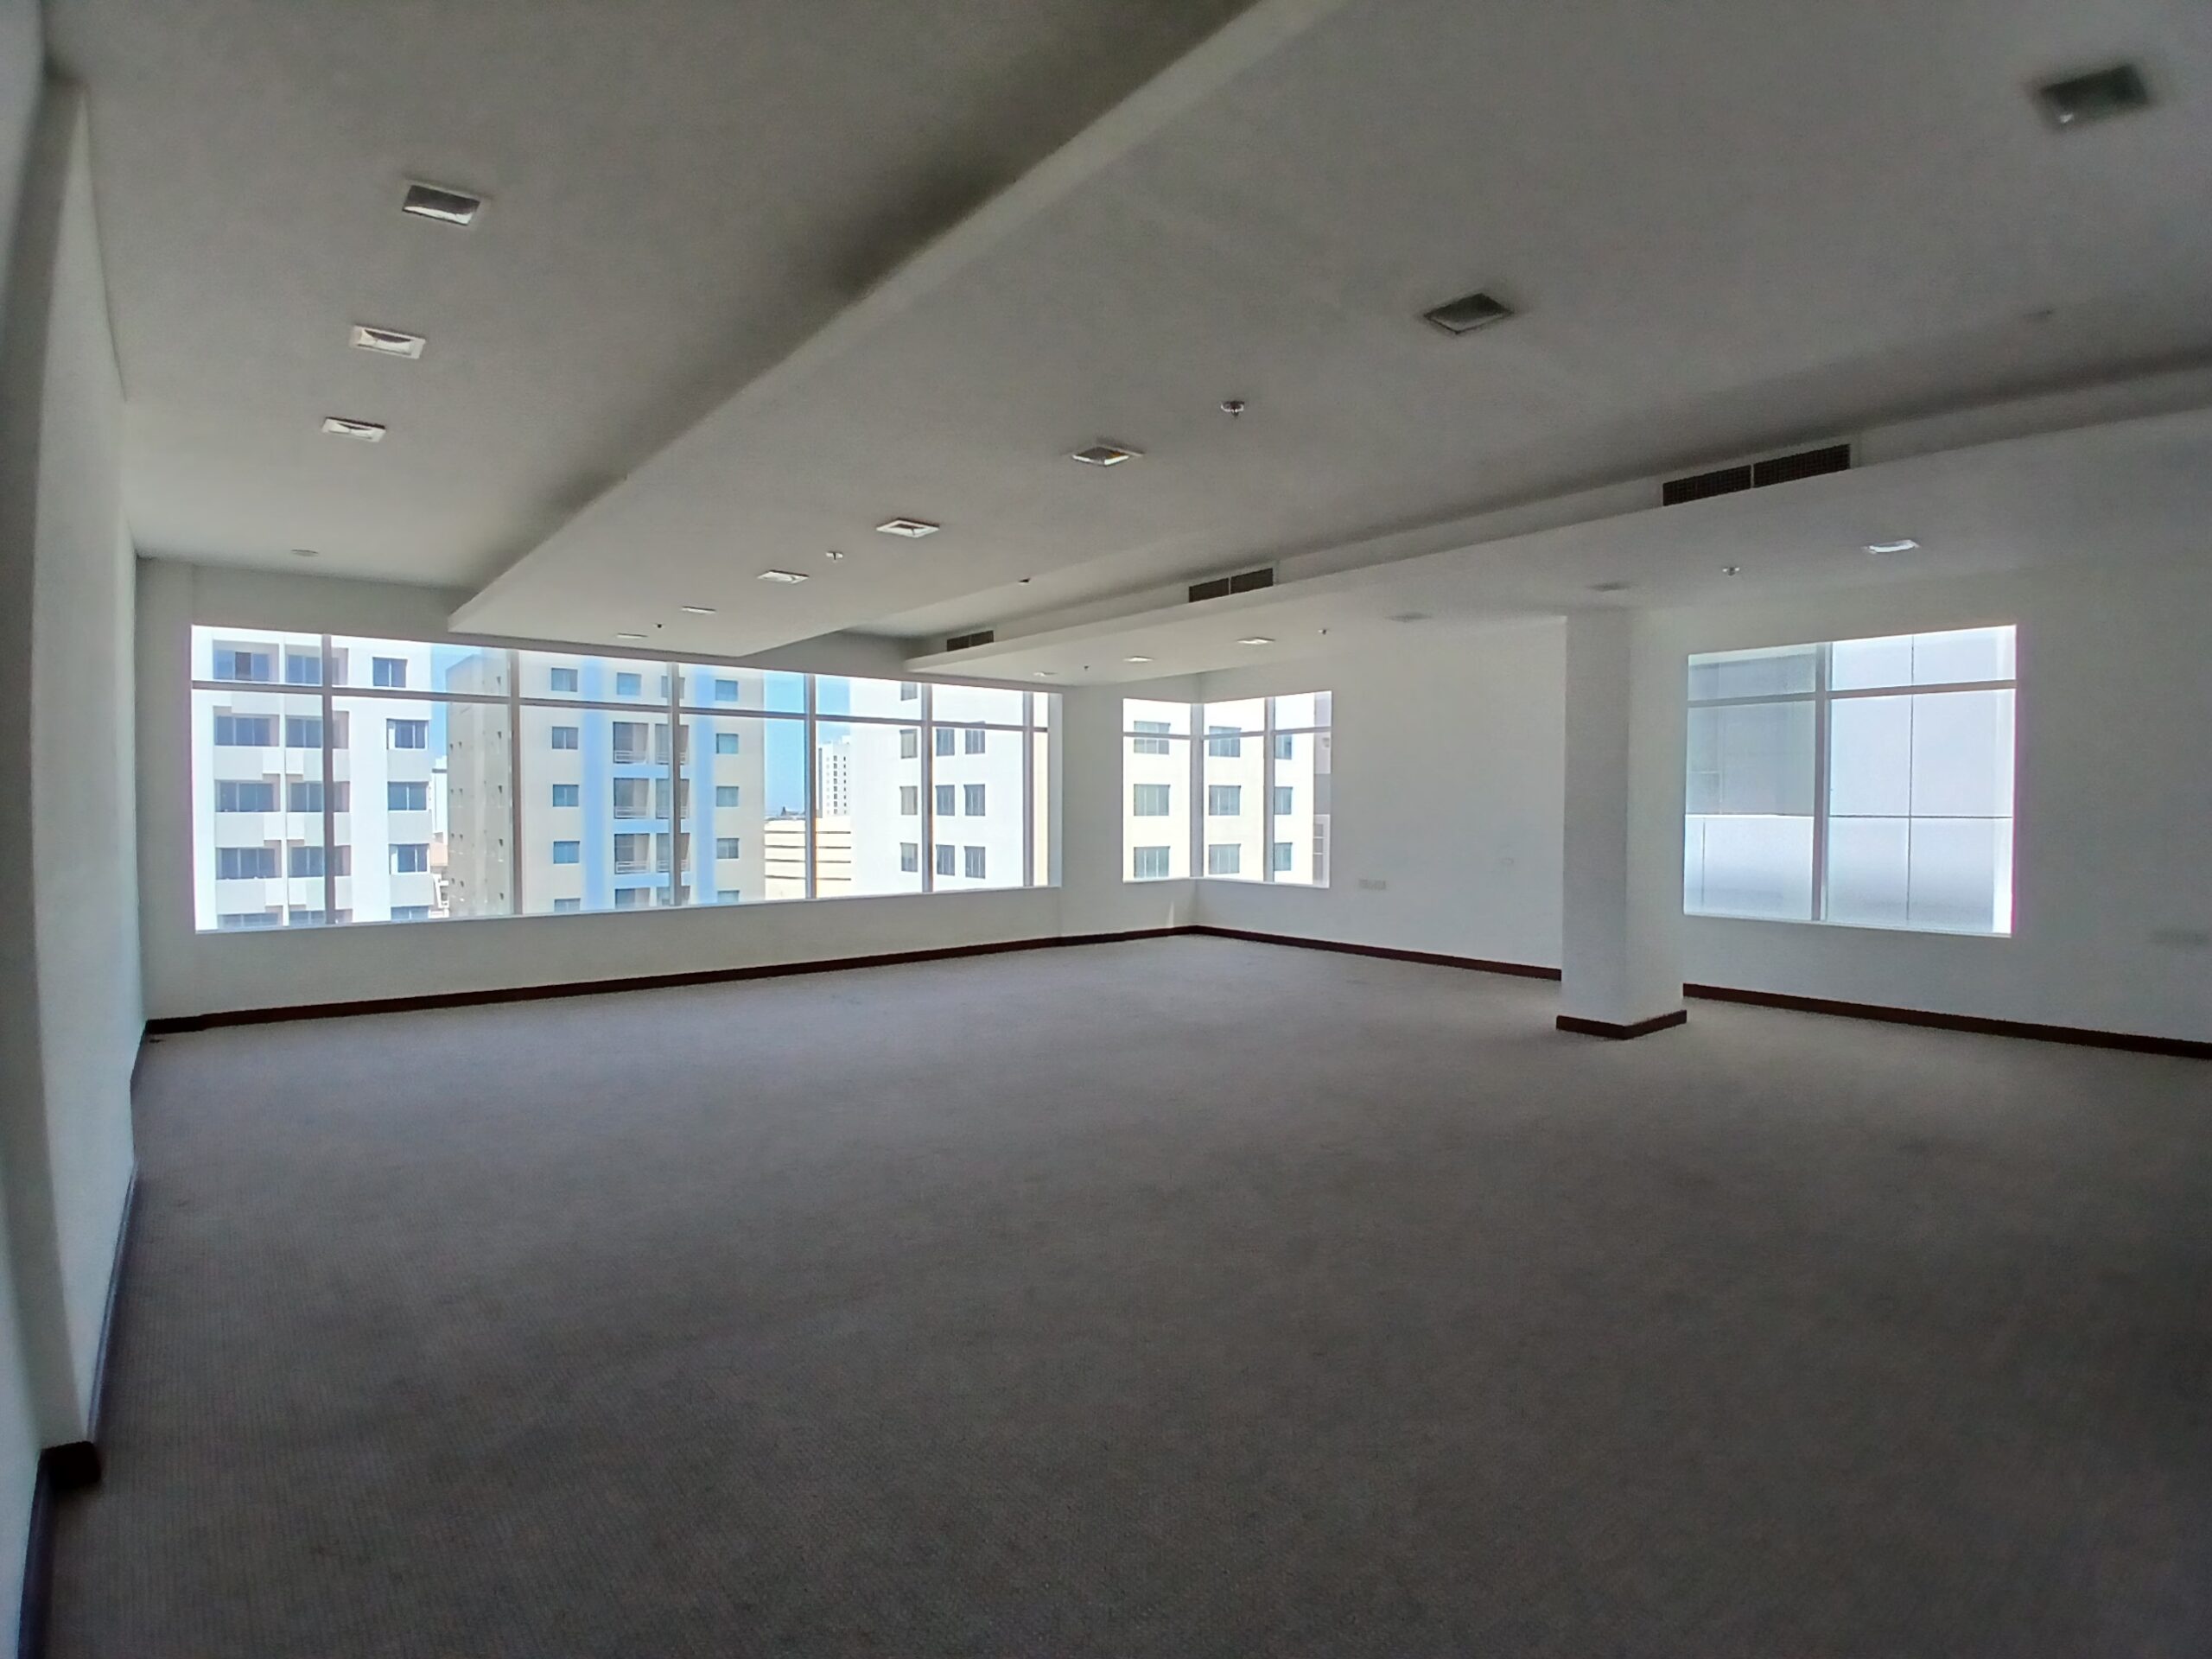 Empty fitted office space with carpeted floors, white walls, and large windows letting in natural light.